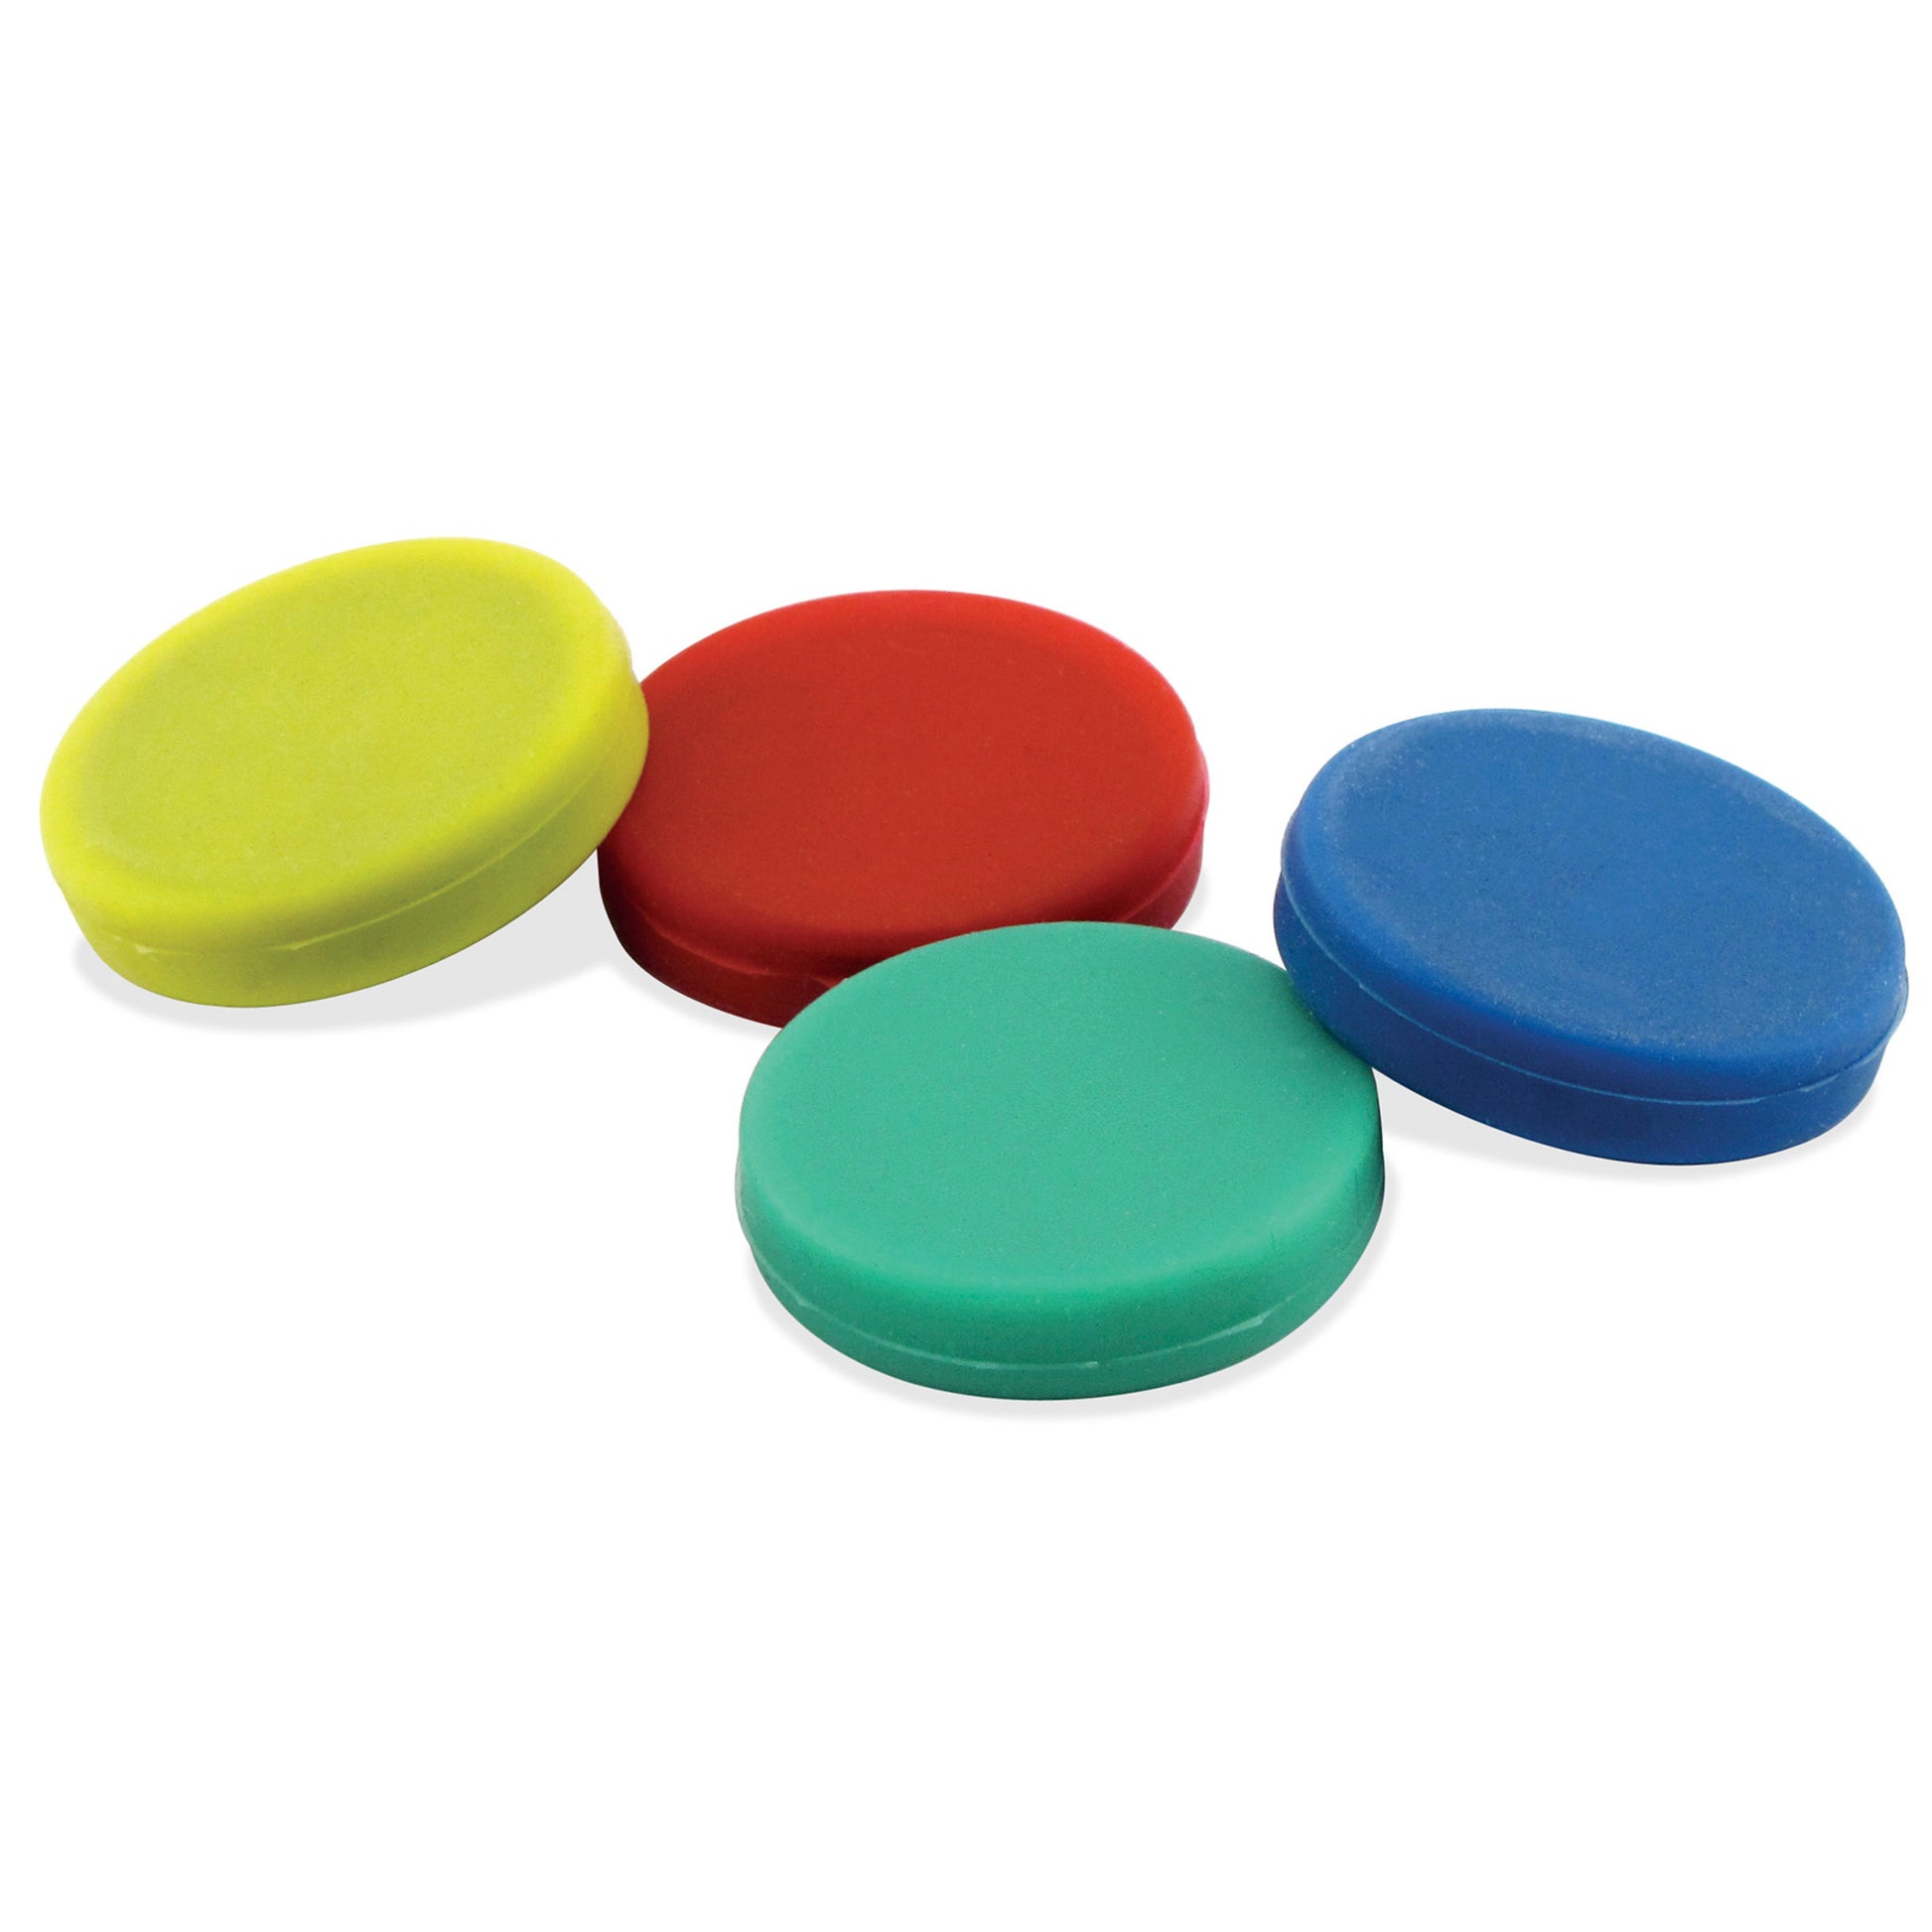 Load image into Gallery viewer, 07591 Ceramic Rubber Coated Disc Magnets (4pk) - 45 Degree Angle View